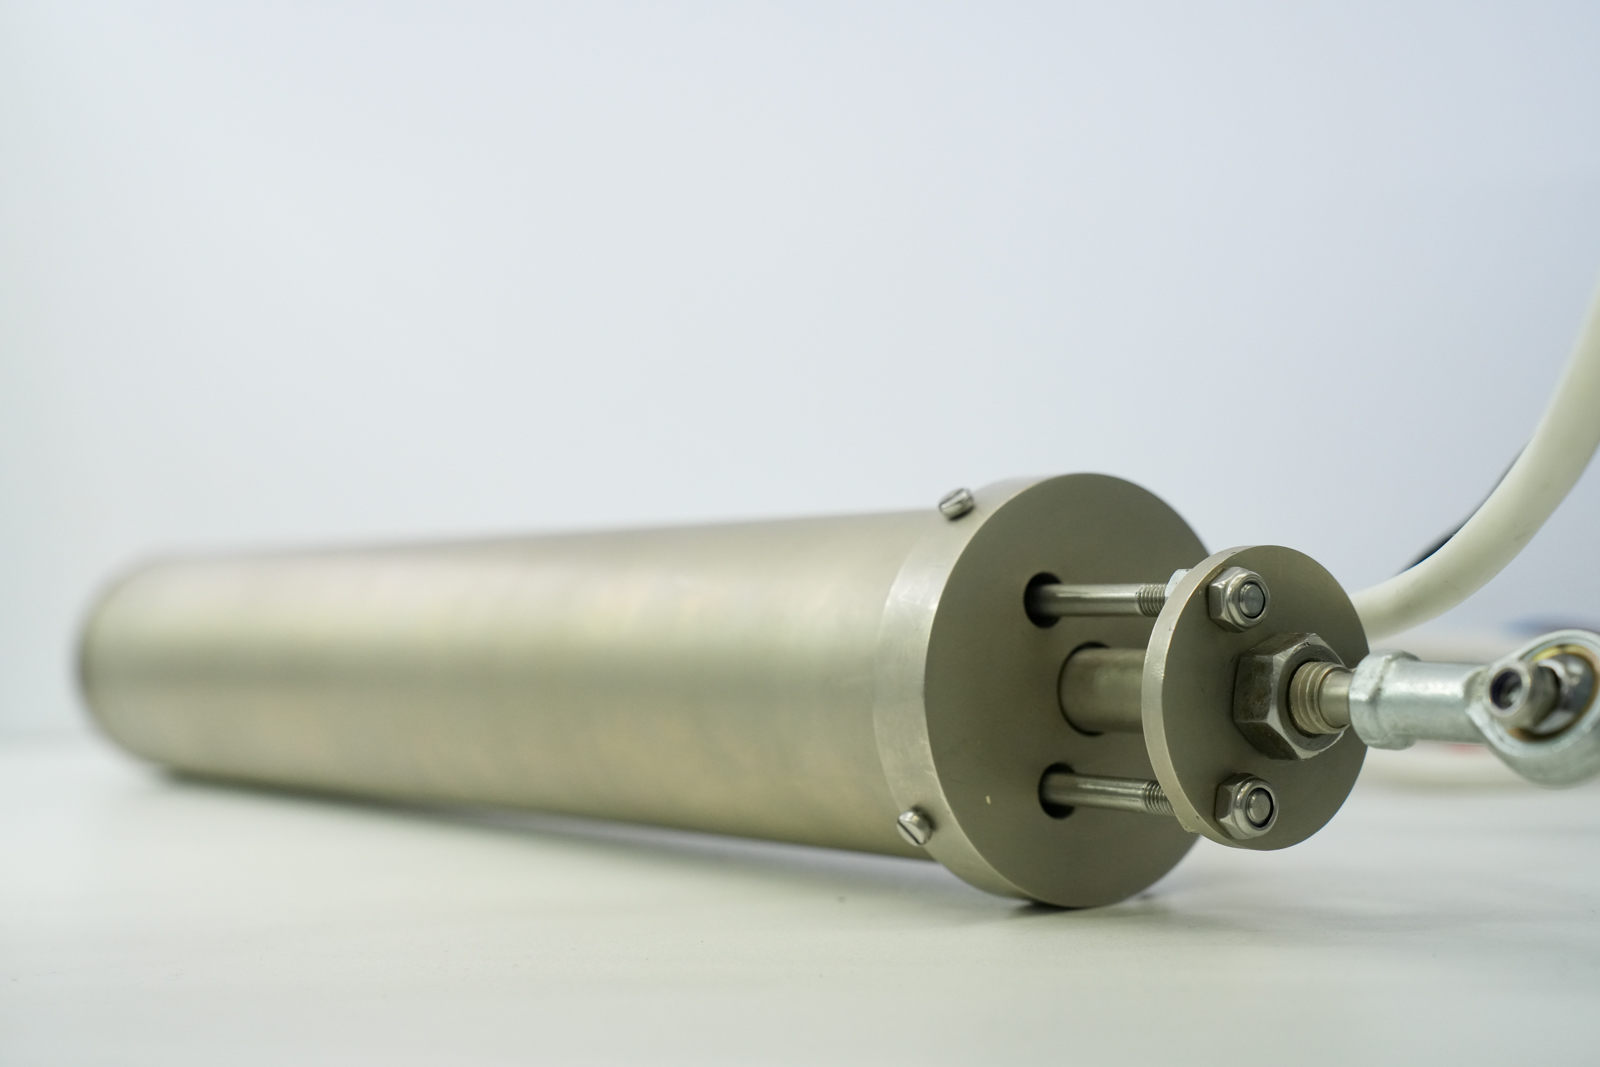 Rostec has Designed Super-Reliable “Magnetic” Damper for Extreme Service Conditions